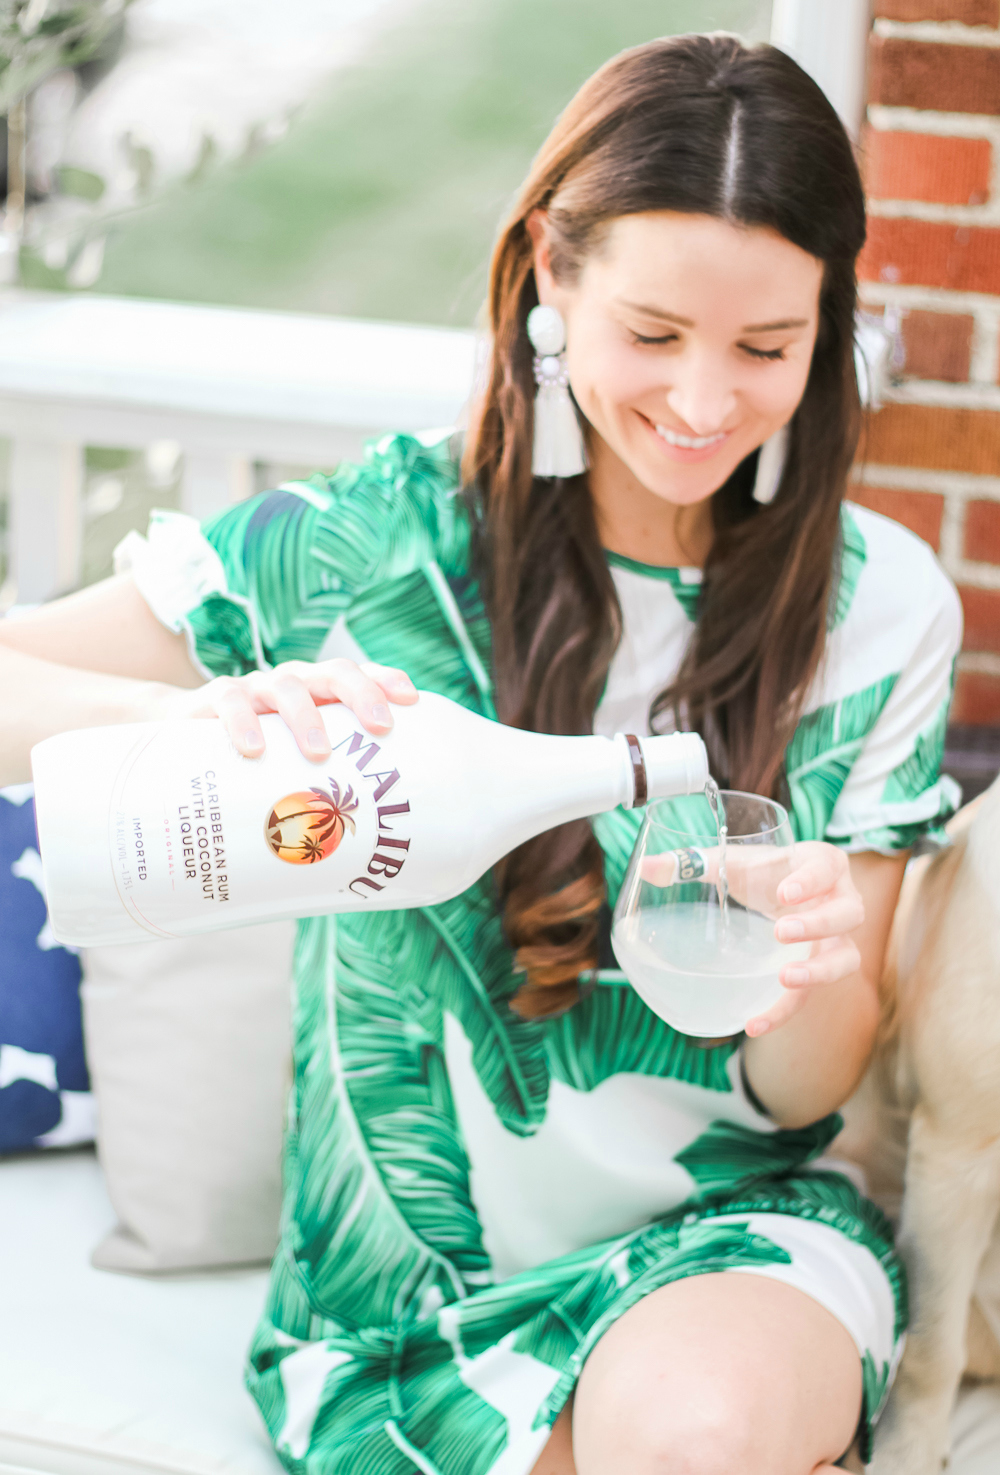 Blogger Stephanie Ziajka shows how to make coconut popsicles with Malibu Rum on Diary of a Debutante